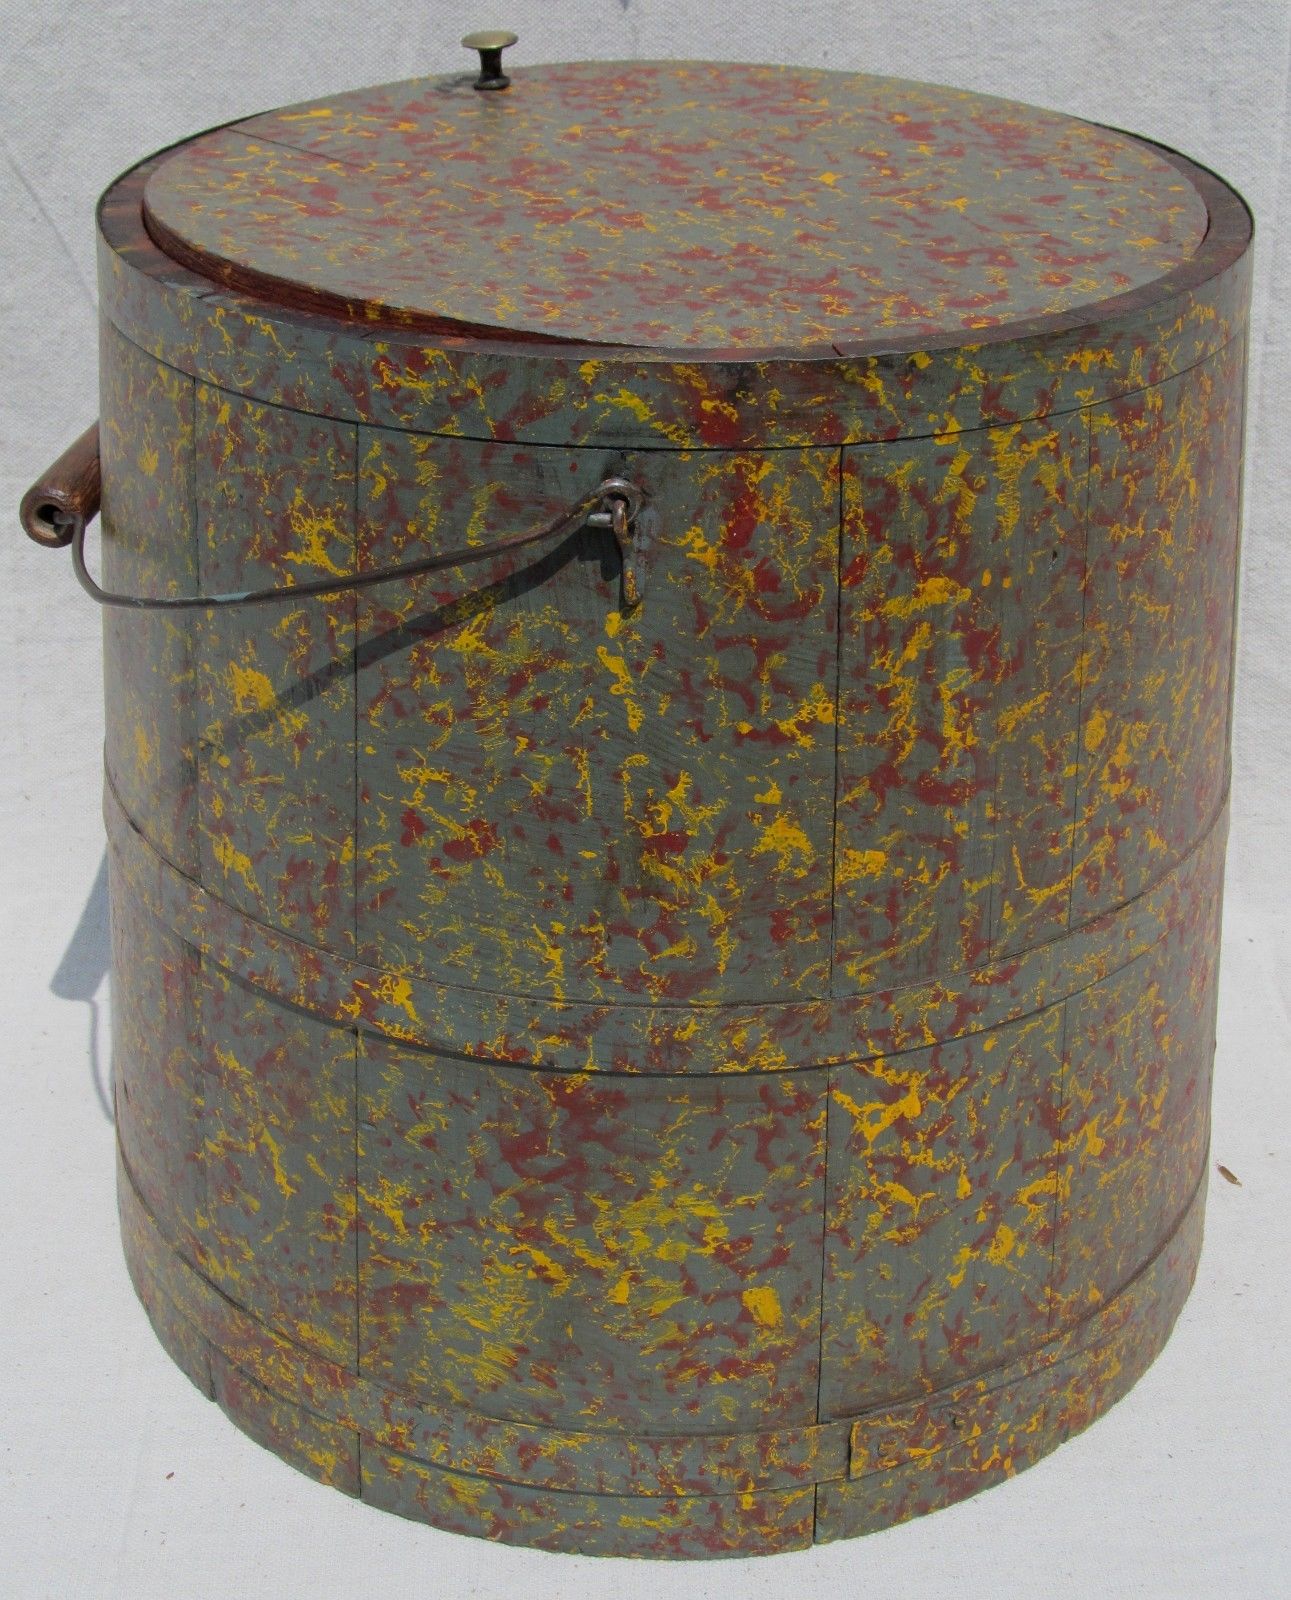 FABULOUS 19TH CENTURY POLY CHROME SPONGE PAINT DECORATED WOODEN COVERED BUCKET